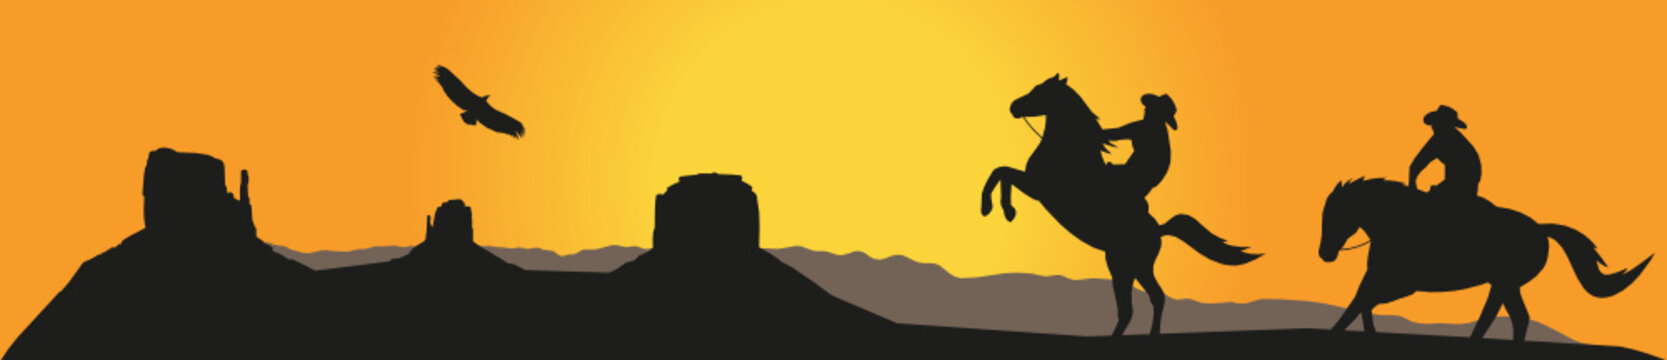 Monument Valley Cowboys Silhouette Sunset